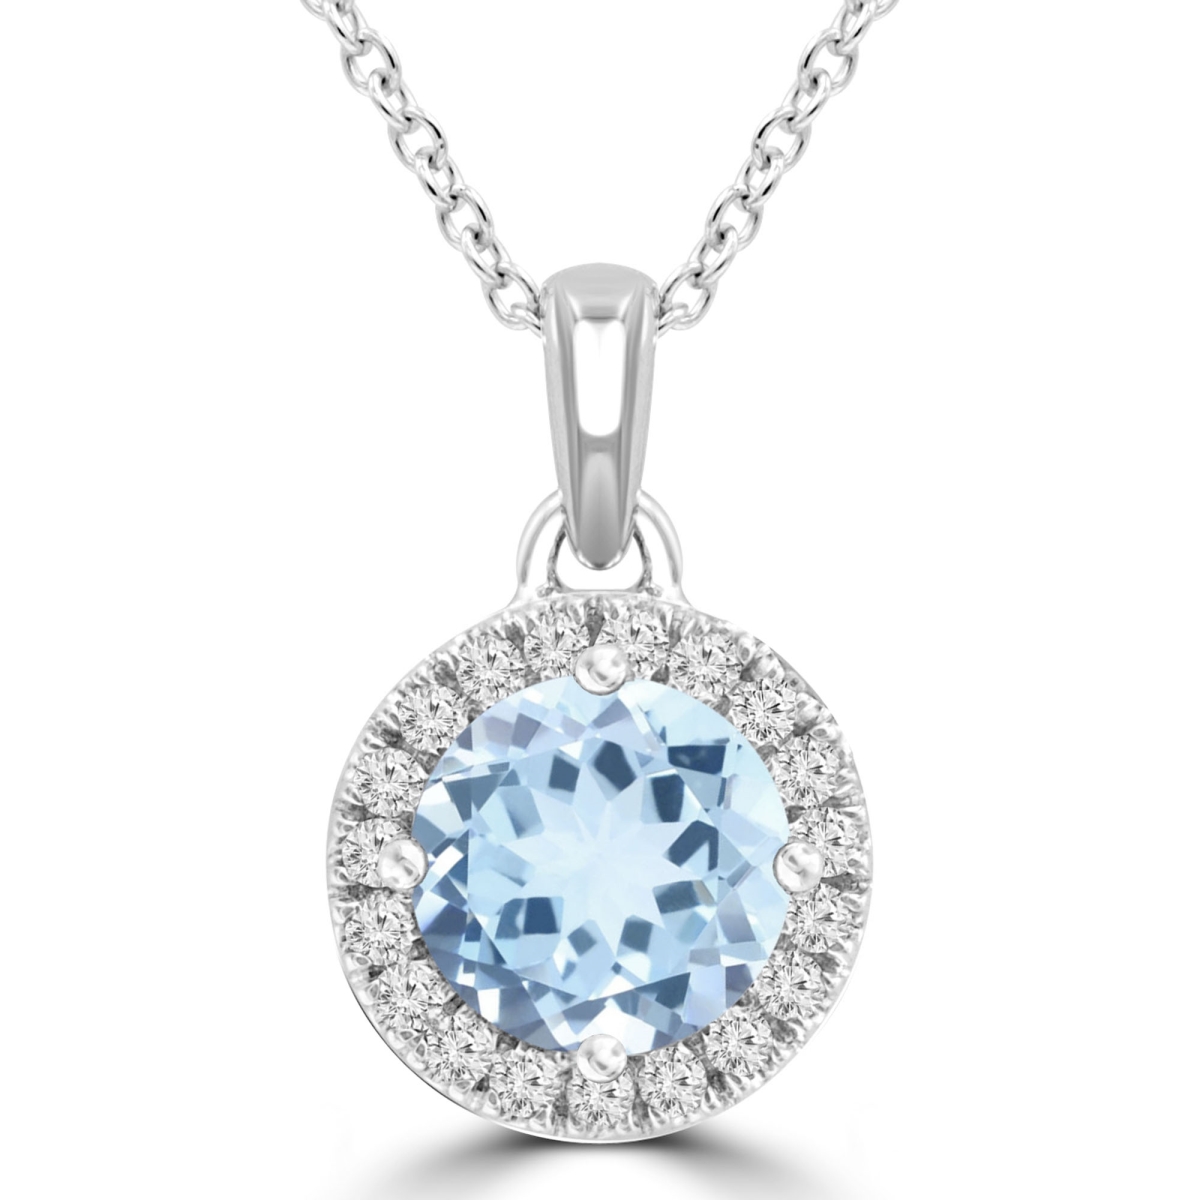 Picture of Majesty Diamonds MDR220196 1.33 CTW Round Blue Topaz Halo Pendant Necklace in 14K White Gold